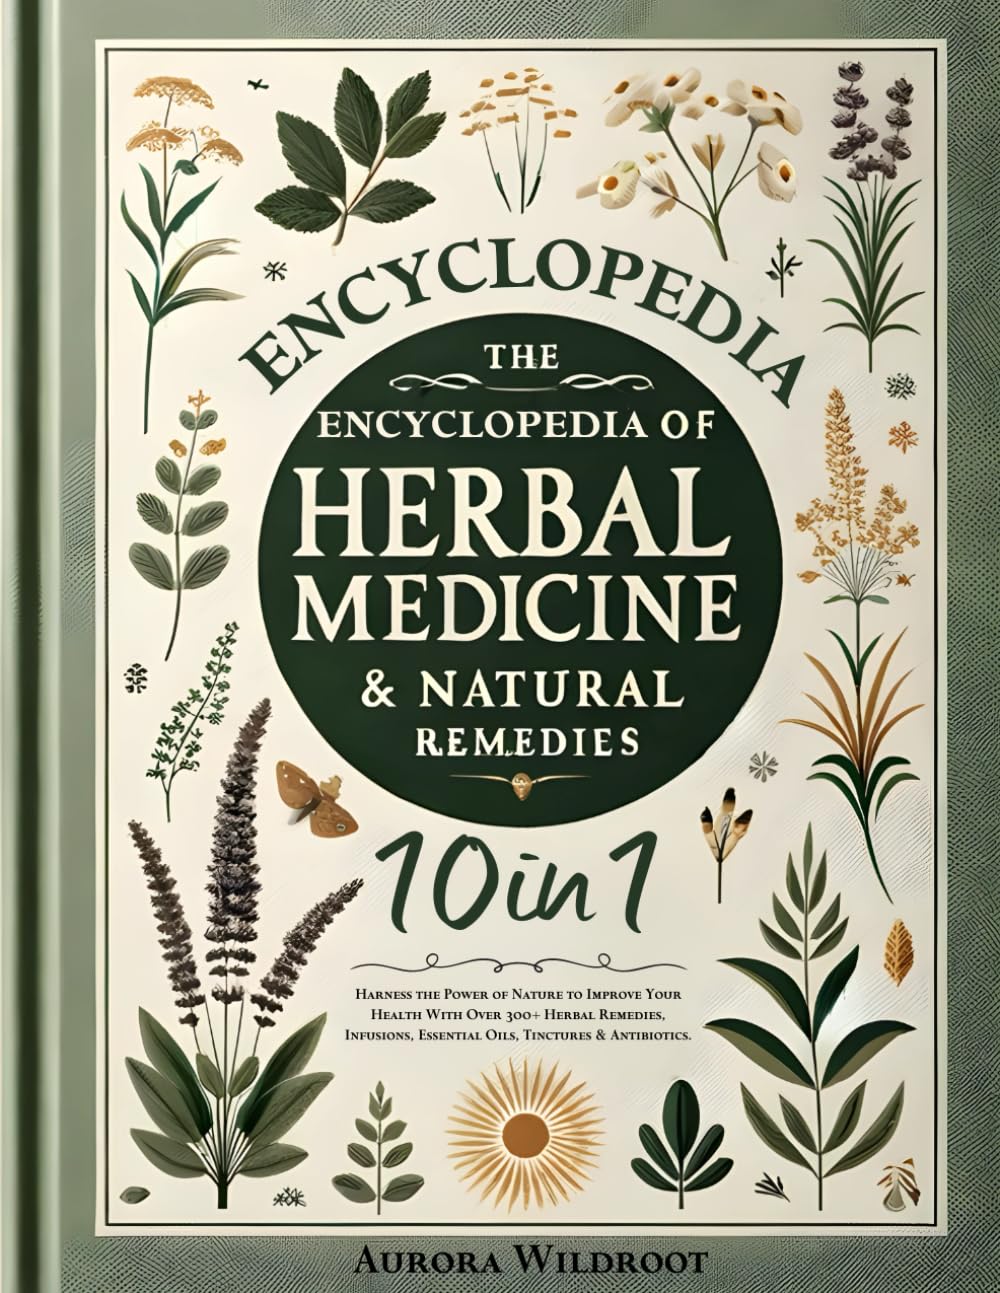 The Encyclopedia of Herbal Medicine & Natural Remedies: Harness the Power of Nature to Improve Your Health With Over 300+ Herbal Remedies, Infusions, Essential Oils, Tinctures & Antibiotics.